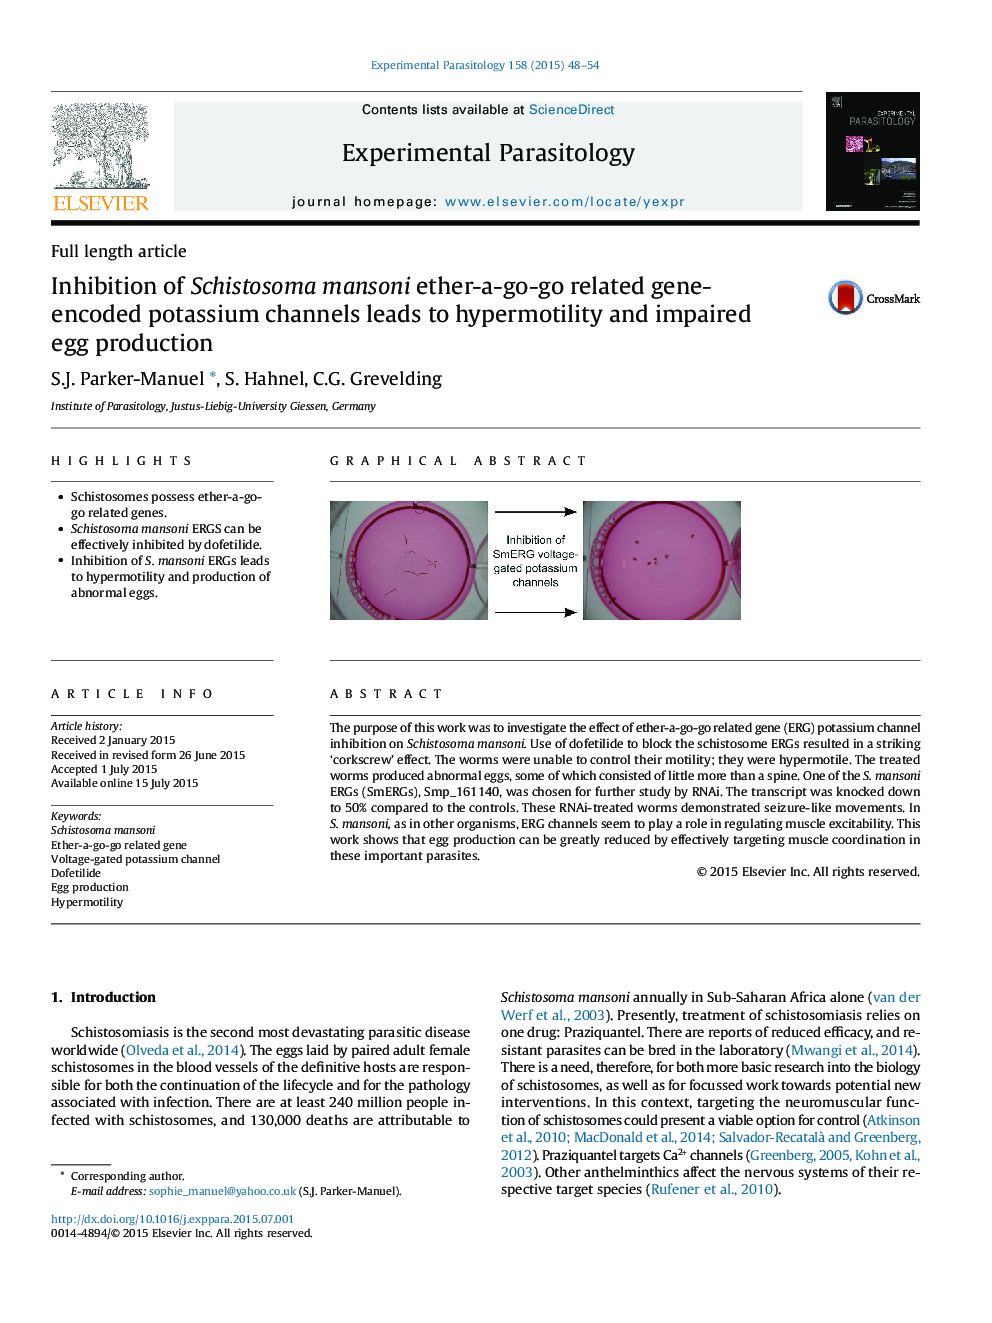 Inhibition of Schistosoma mansoni ether-a-go-go related gene-encoded potassium channels leads to hypermotility and impaired egg production